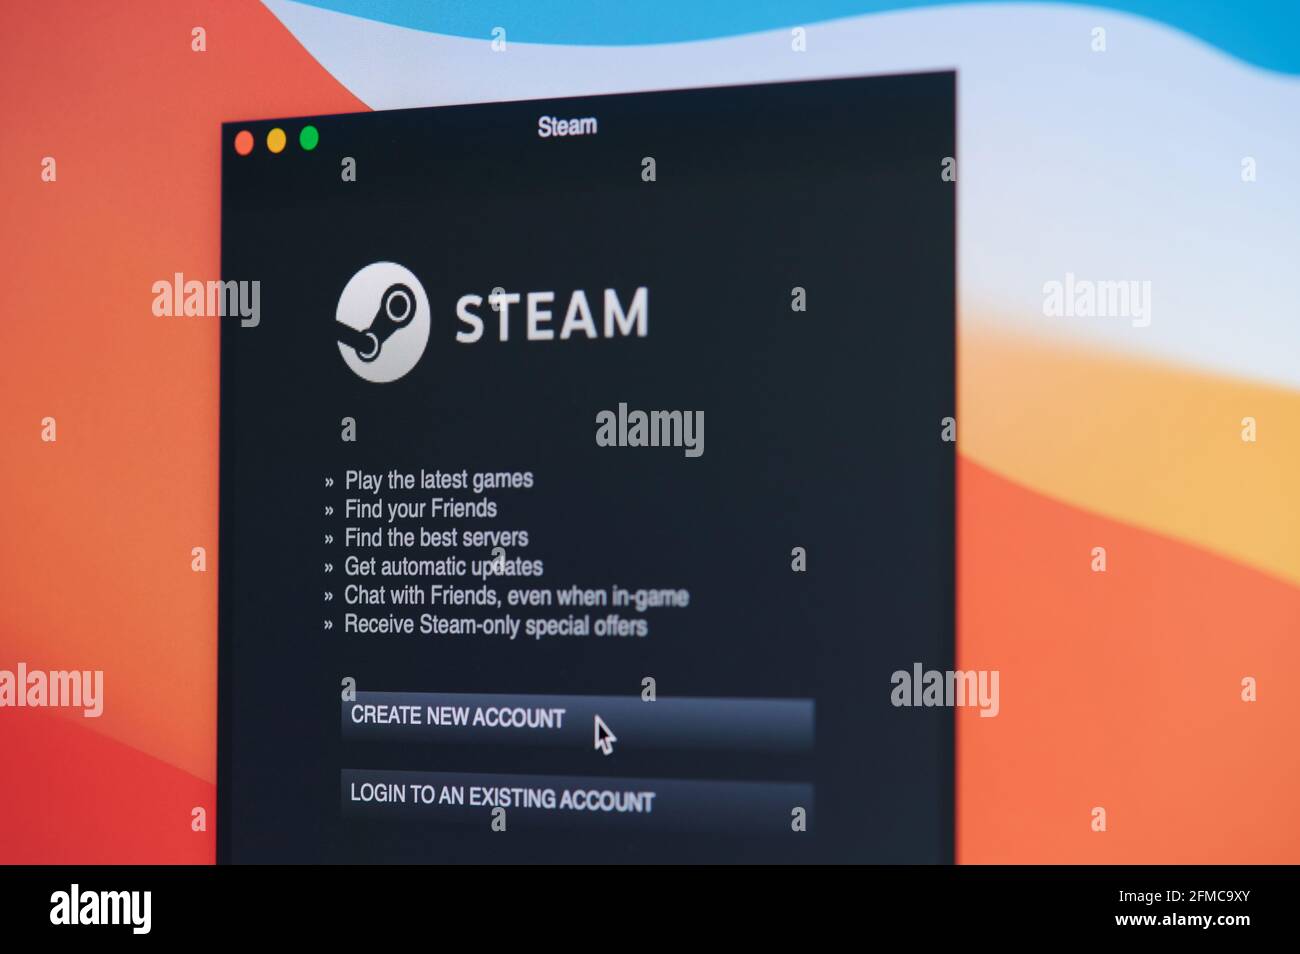 New york, USA - April 19, 2021: Login in steam account on laptop screen macro close up view Stock Photo